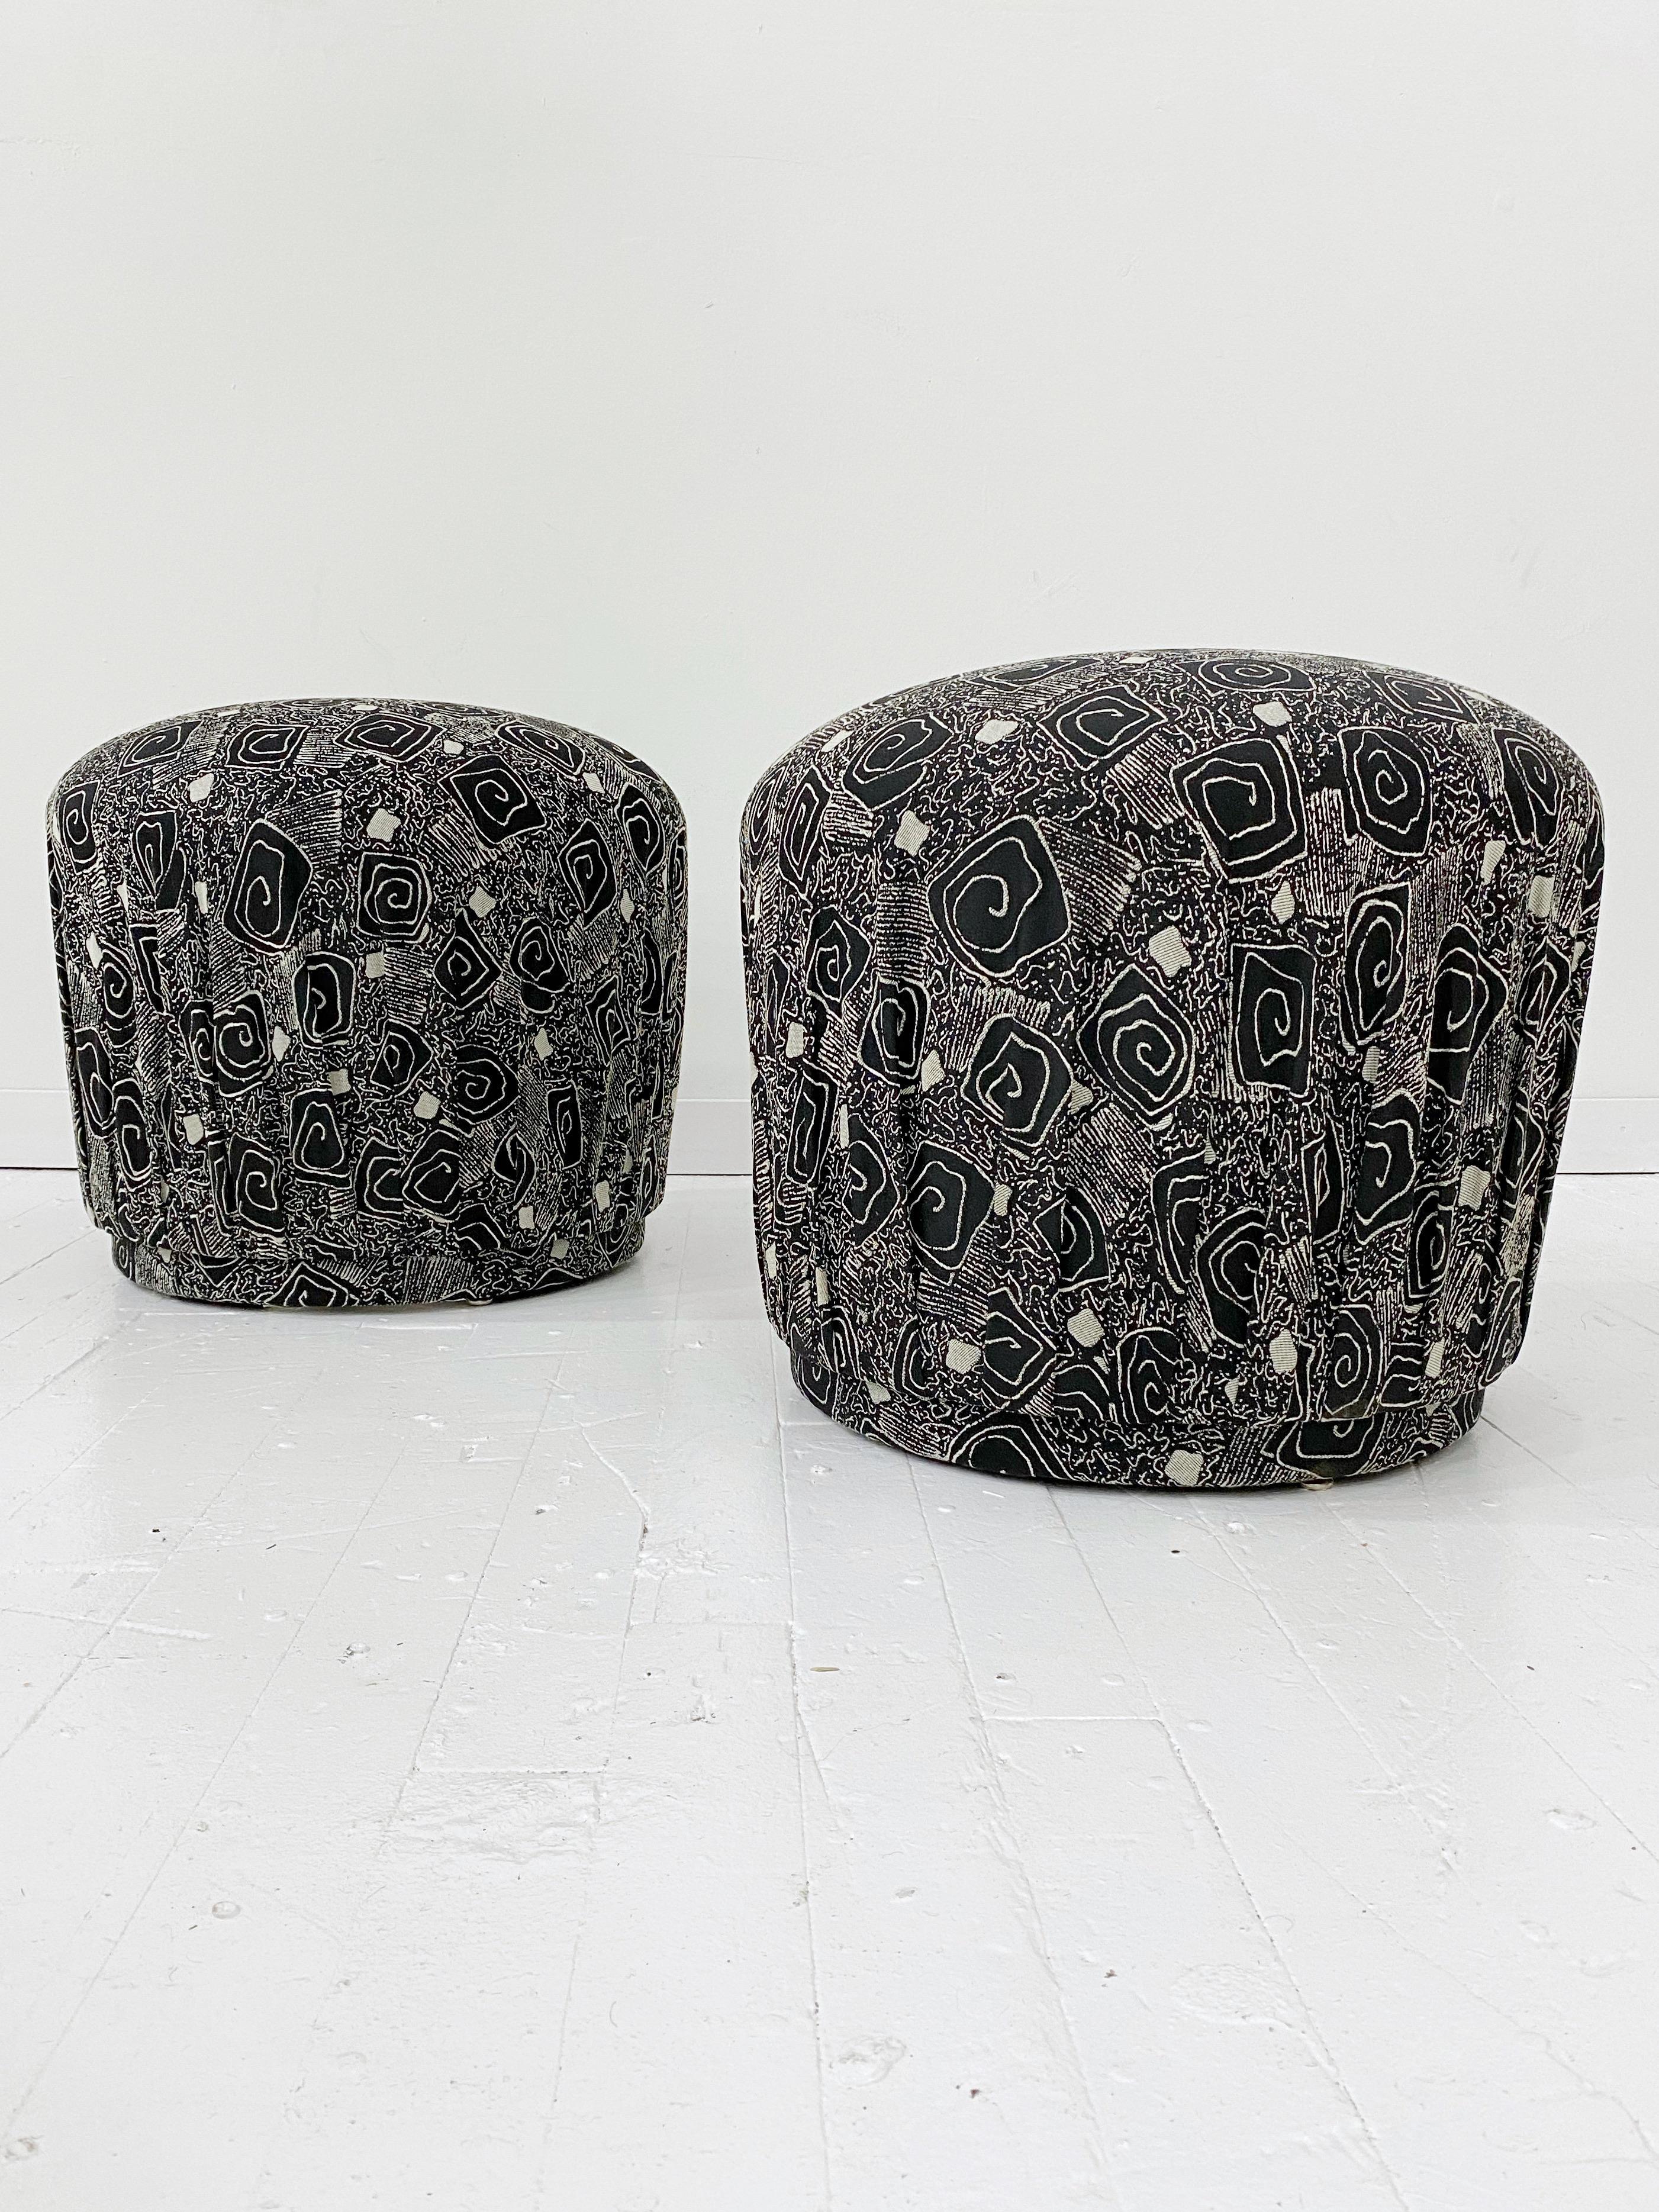 Black and white upholstered pouf ottoman. Abstract spiral jacquard fabric pleated at plinth base. Pair available.